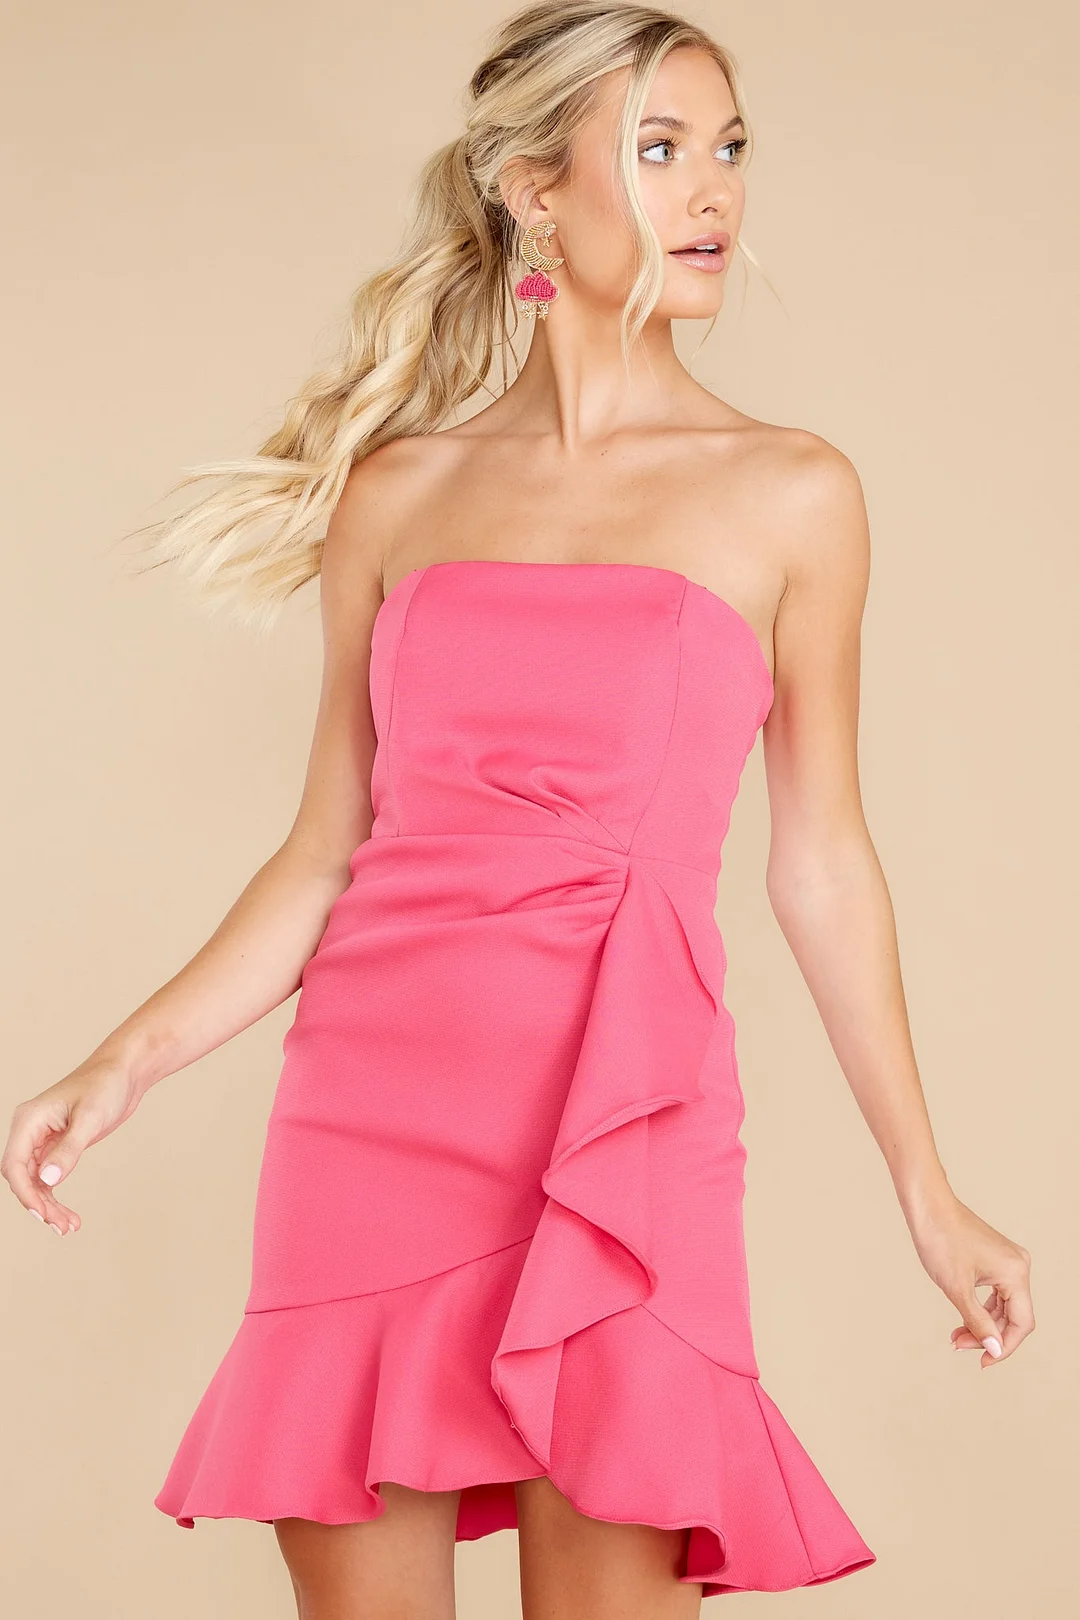 Carefully Considered Hot Pink Dress